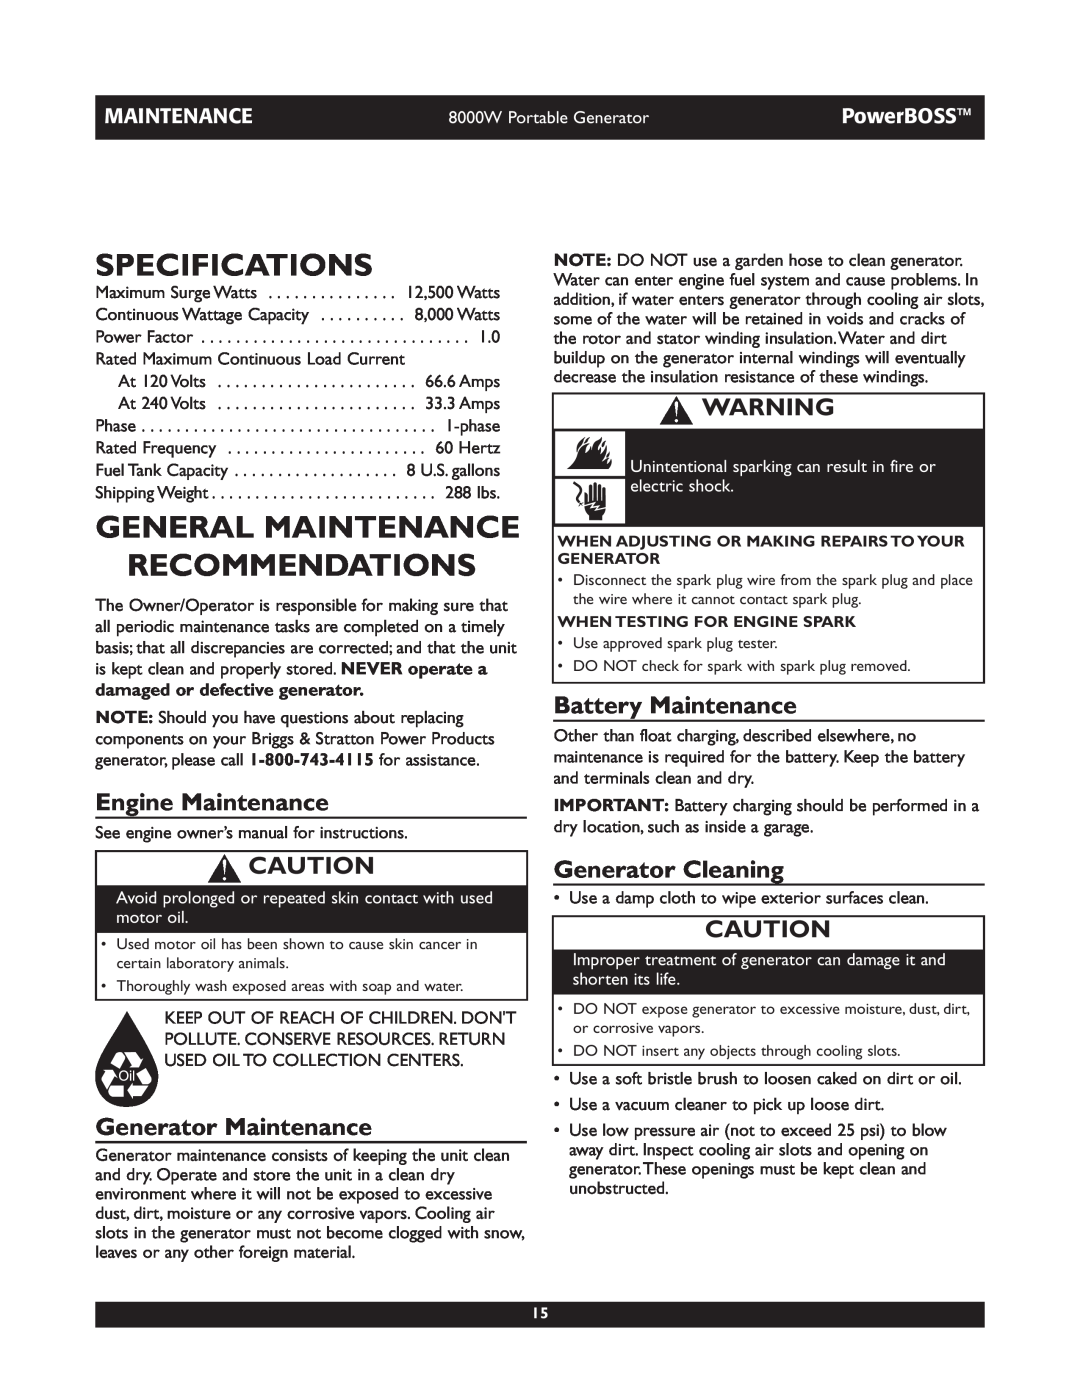 Briggs & Stratton 30228 Specifications, General Maintenance Recommendations, Engine Maintenance, Battery Maintenance 